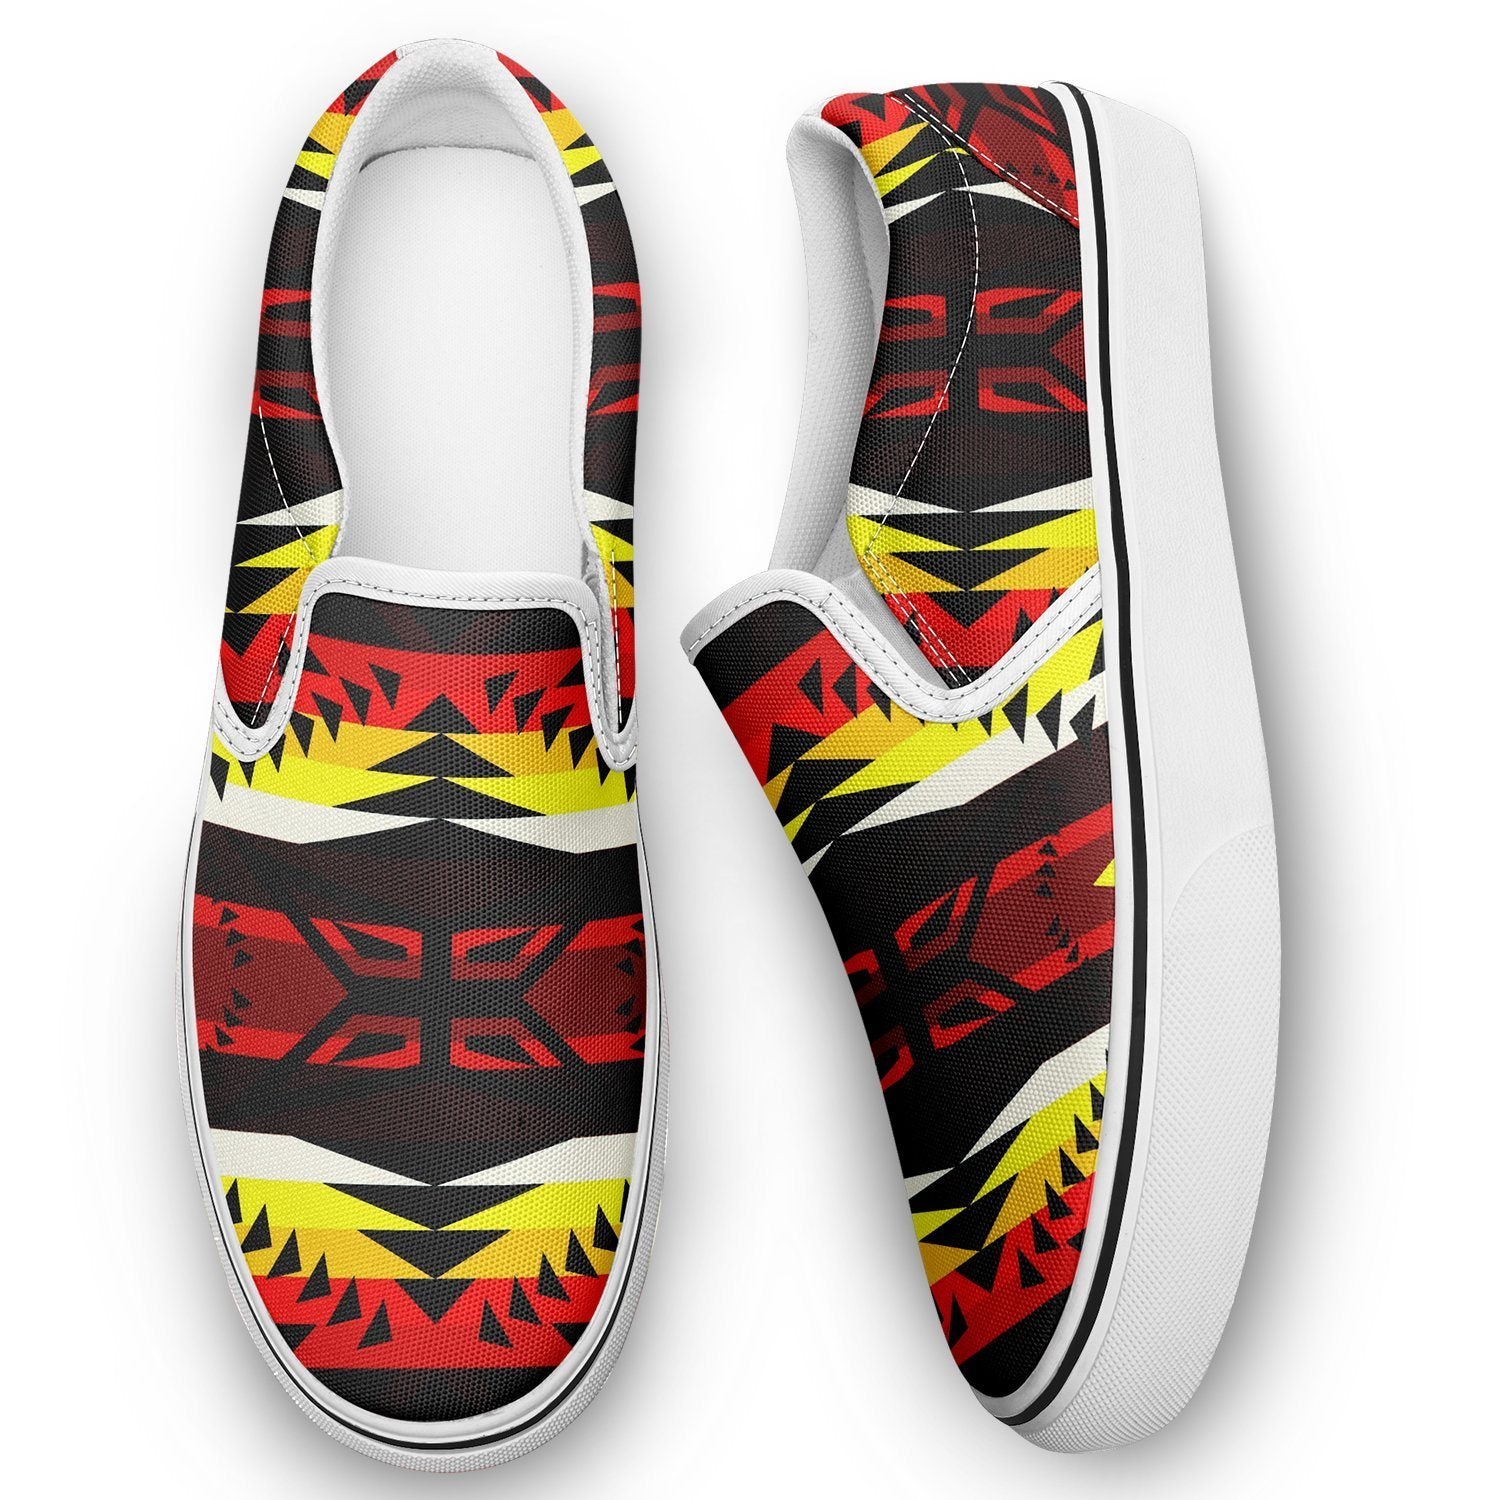 Canyon War Party Otoyimm Kid's Canvas Slip On Shoes 49 Dzine 